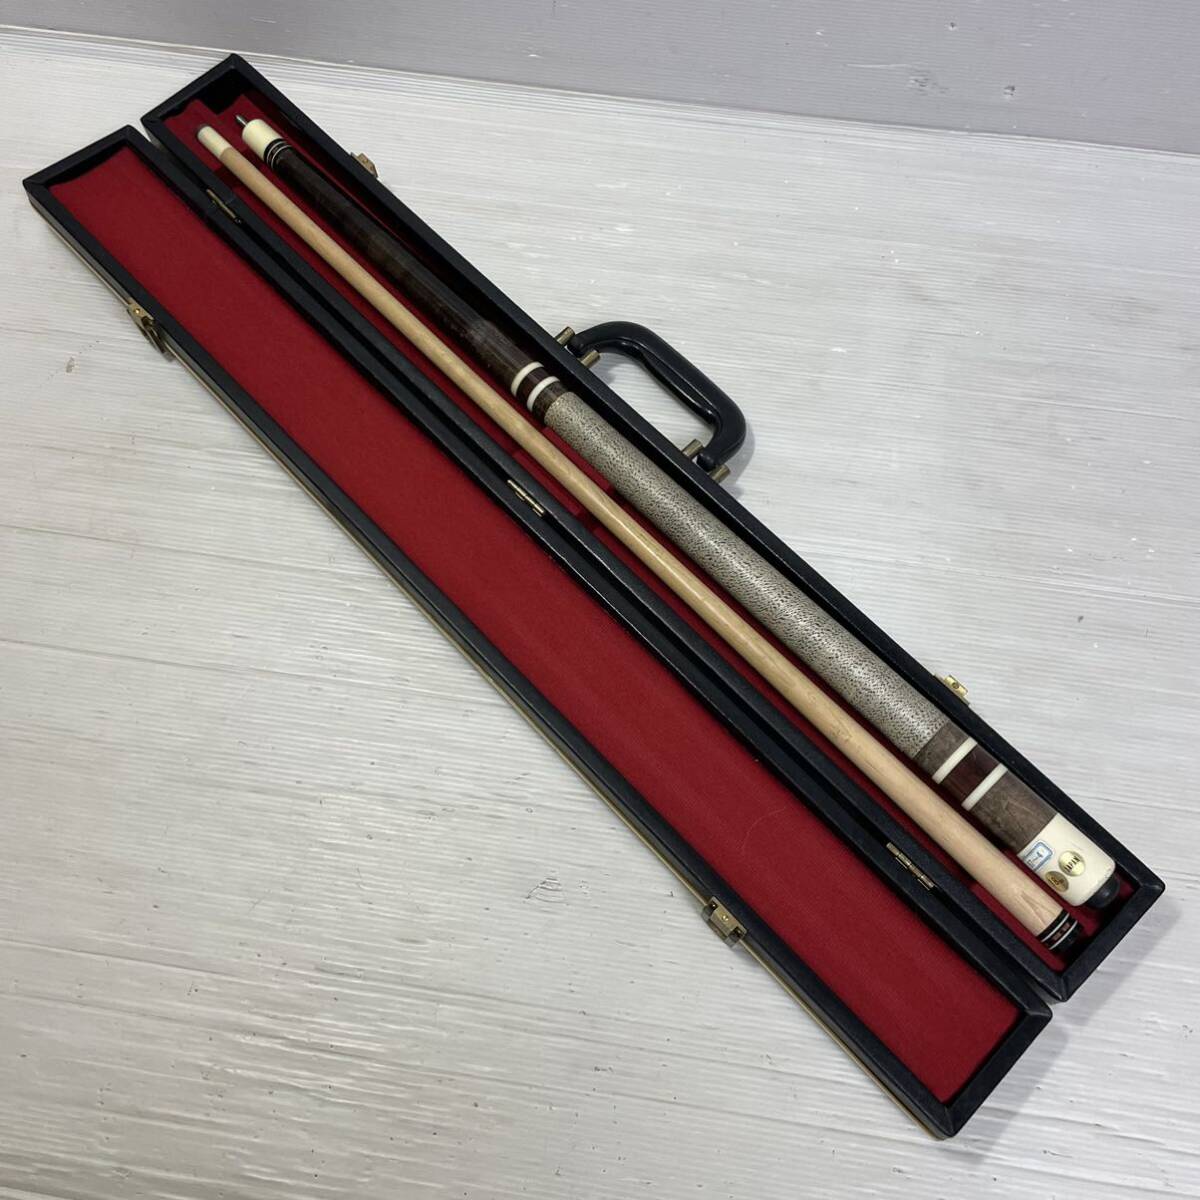 0F87 Helmstetter hell ms tedder billiards cue 87-4 18oz. made in Japan case attaching 